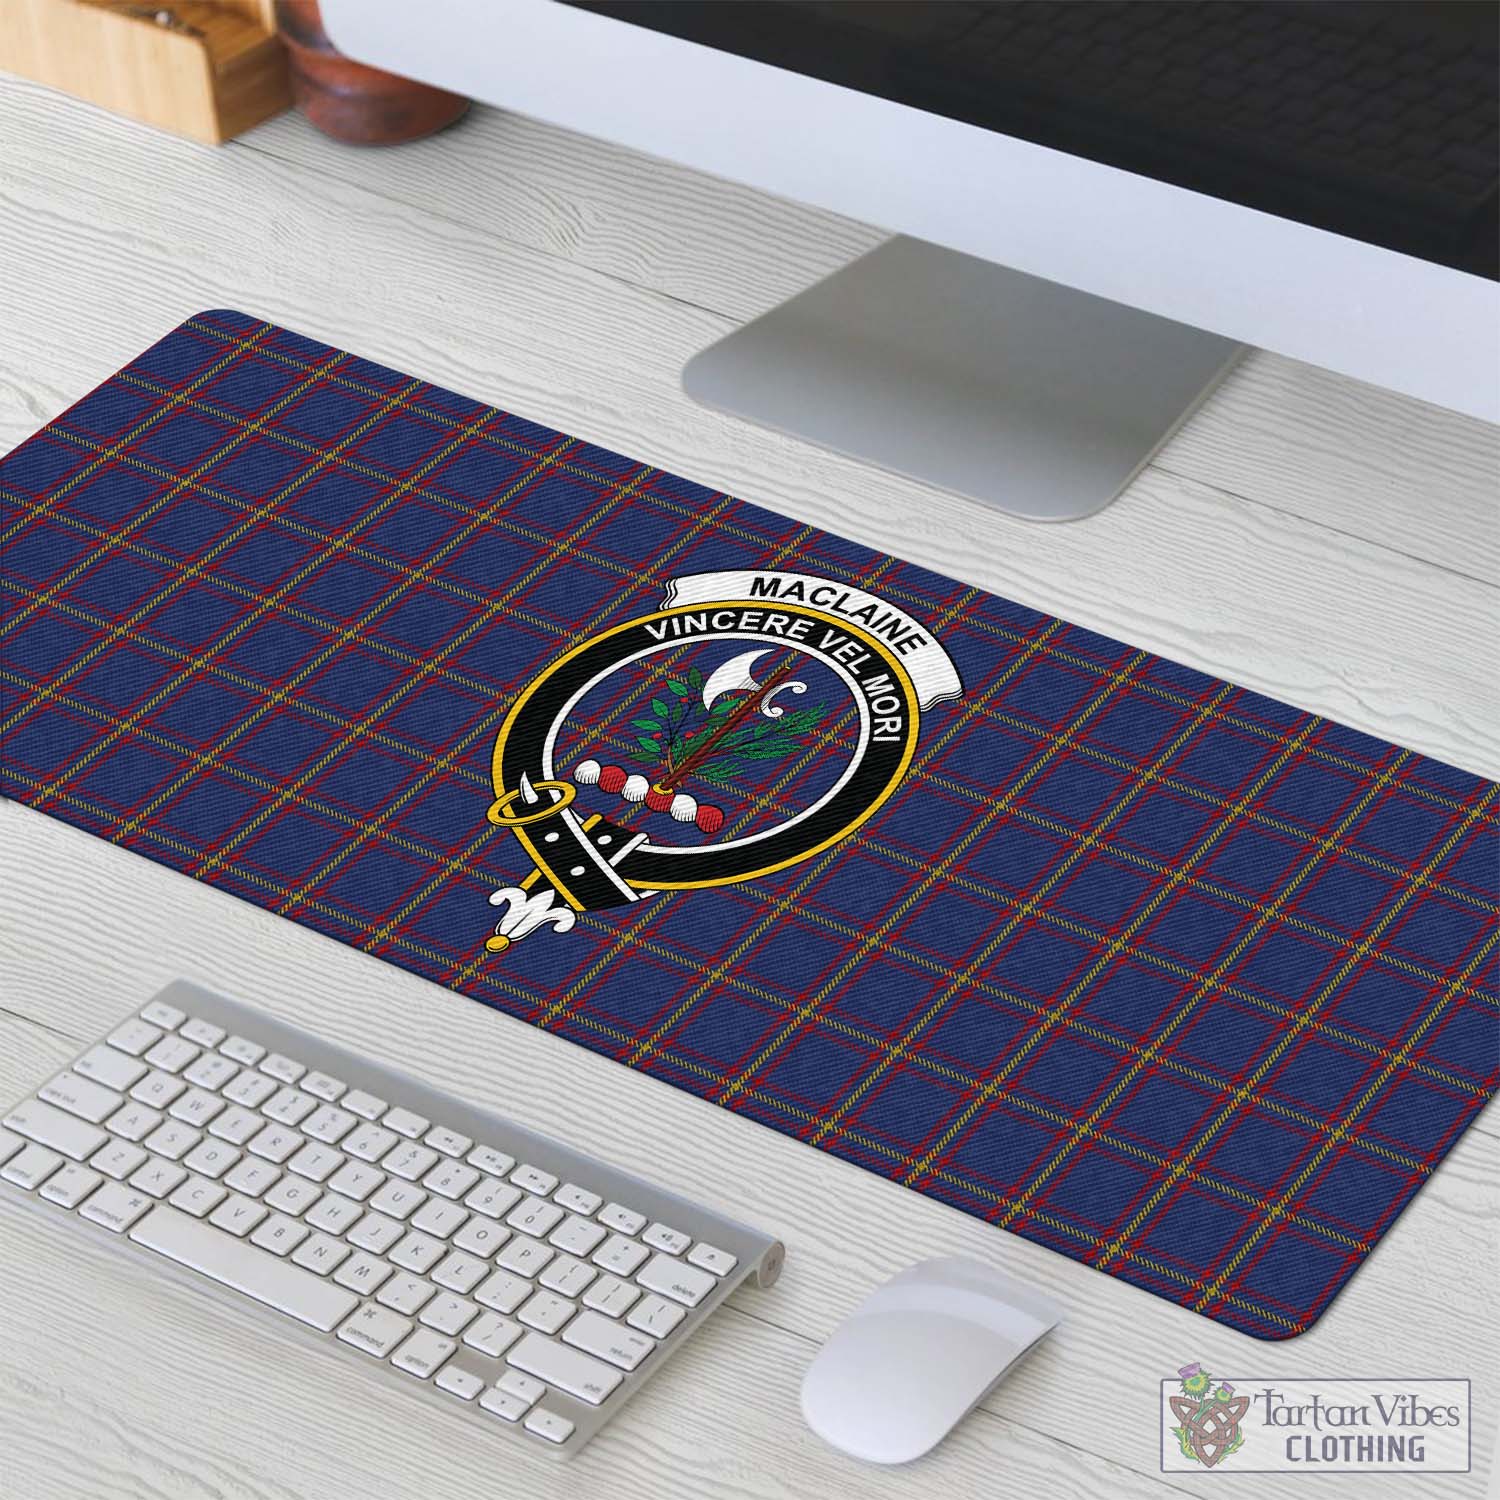 Tartan Vibes Clothing MacLaine of Lochbuie Tartan Mouse Pad with Family Crest